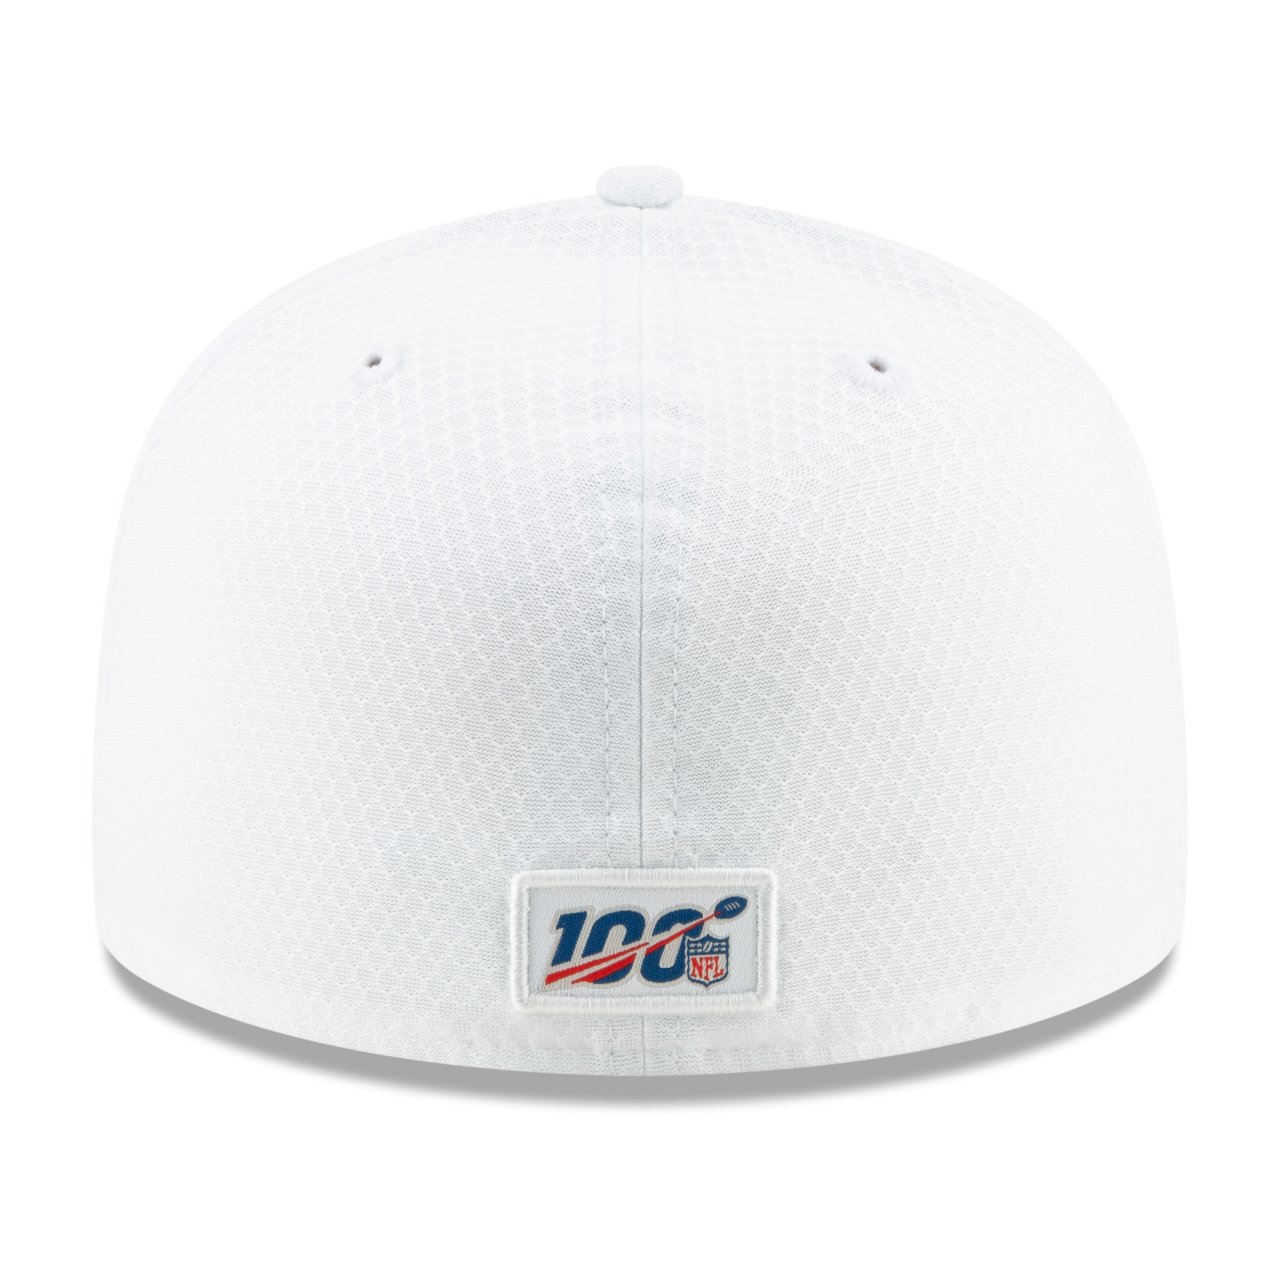 New Era 59Fifty Cap - PLATINUM Sideline NFL Dallas Cowboys | Fitted ...